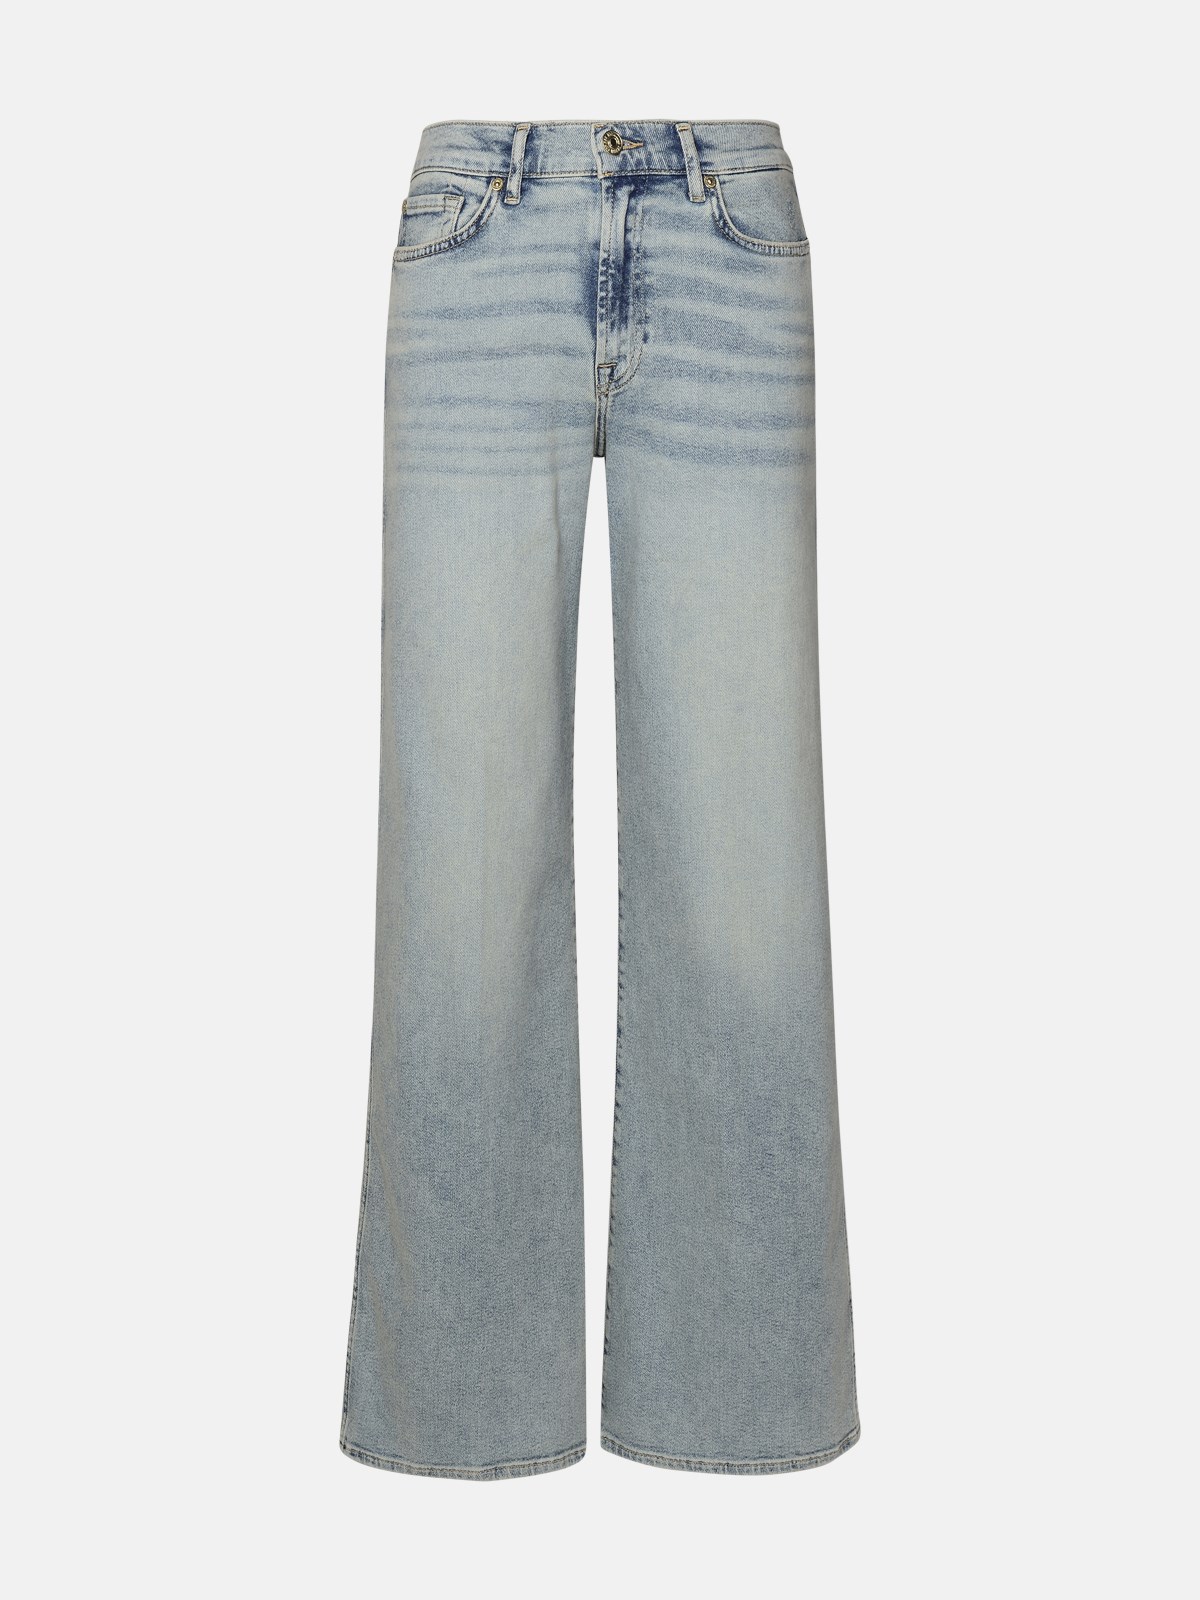 7 For All Mankind Light Blue Cotton Jeans